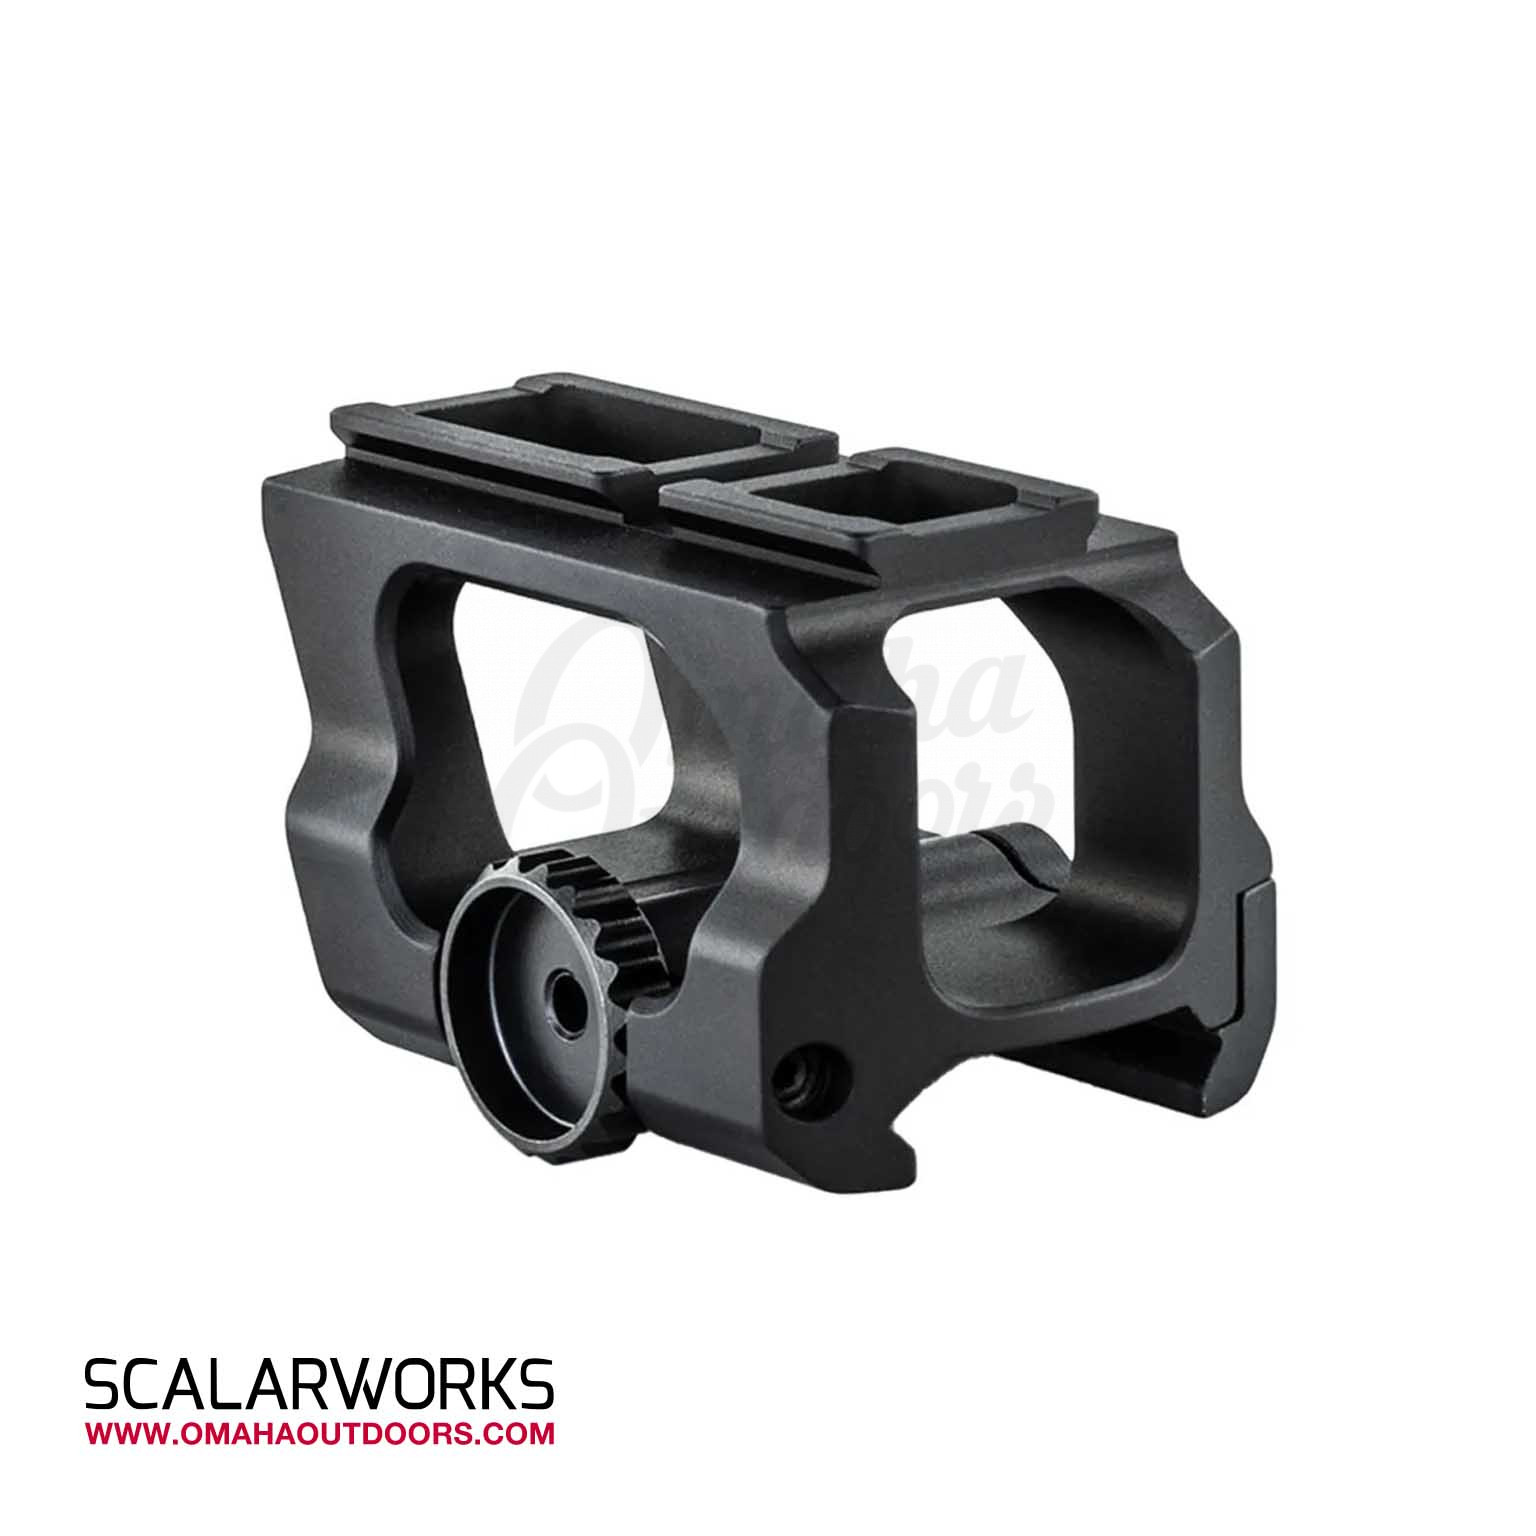 SW0320 SCALARWORKS LEAP 03 Aimpoint ACRO Mount 1.93 - Primary Weapons ...